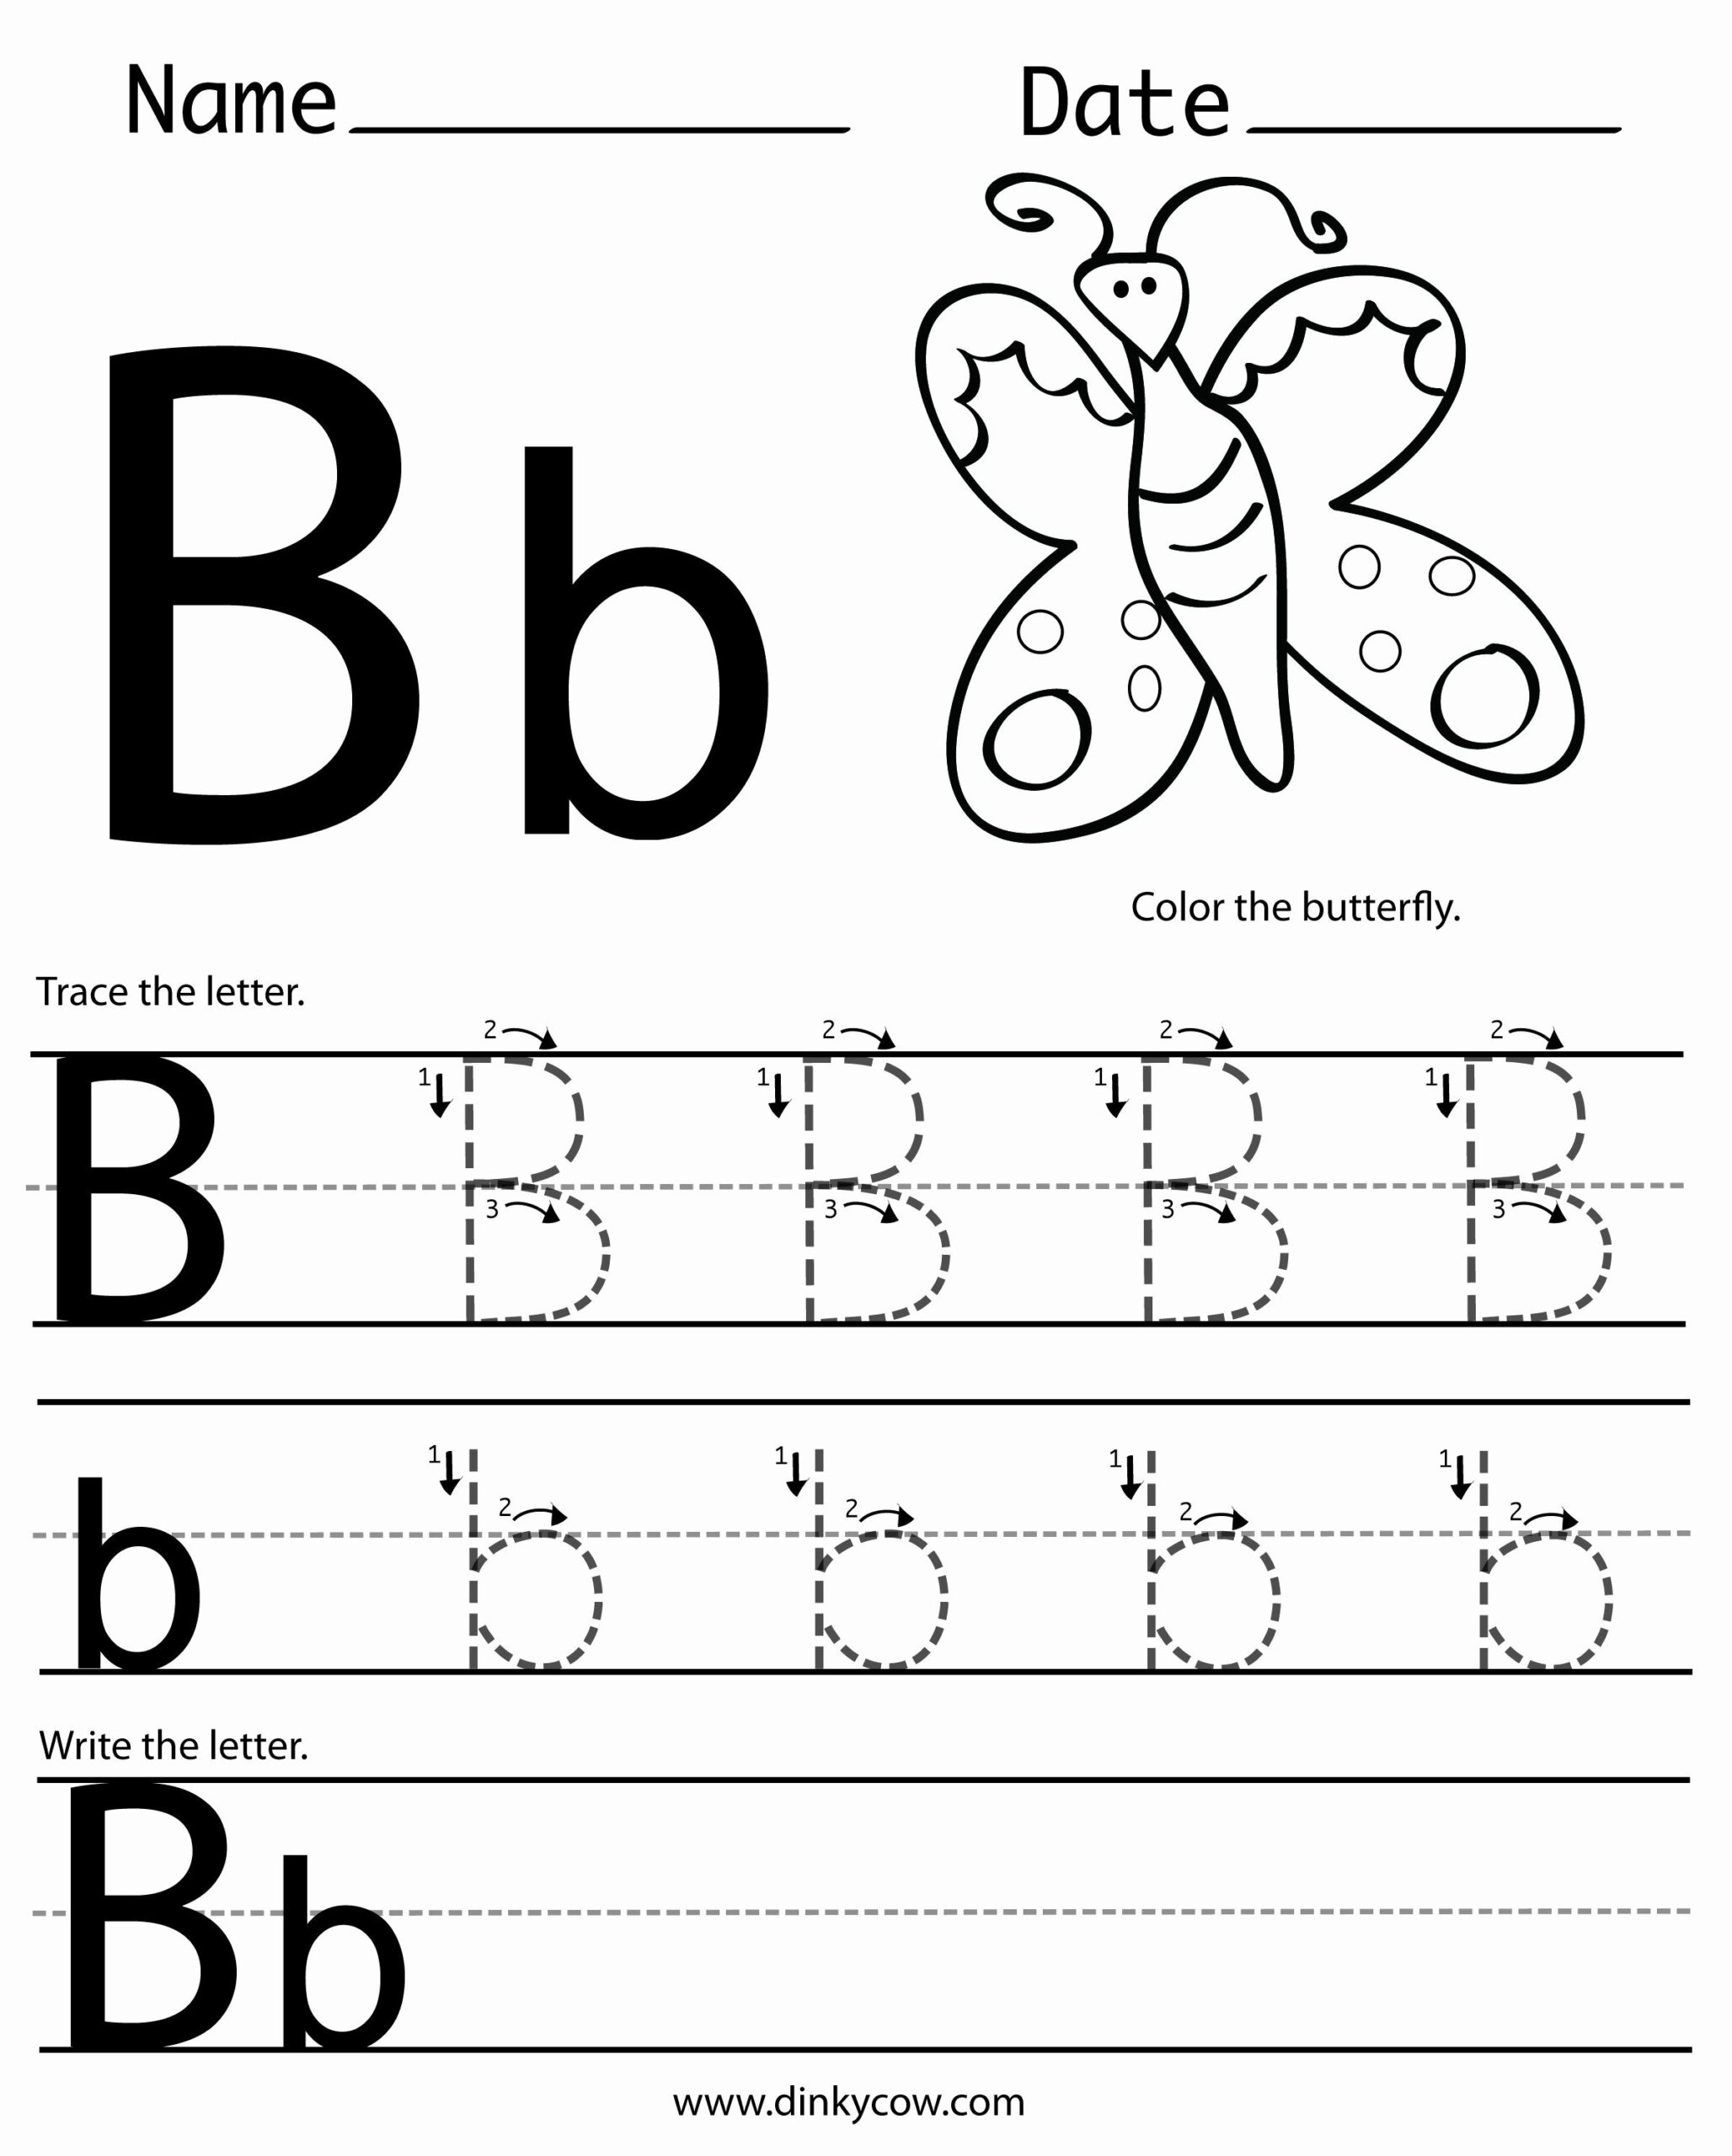 Letter B Worksheets #subjects #preschool #educationlevel with regard to Letter B Worksheets Free